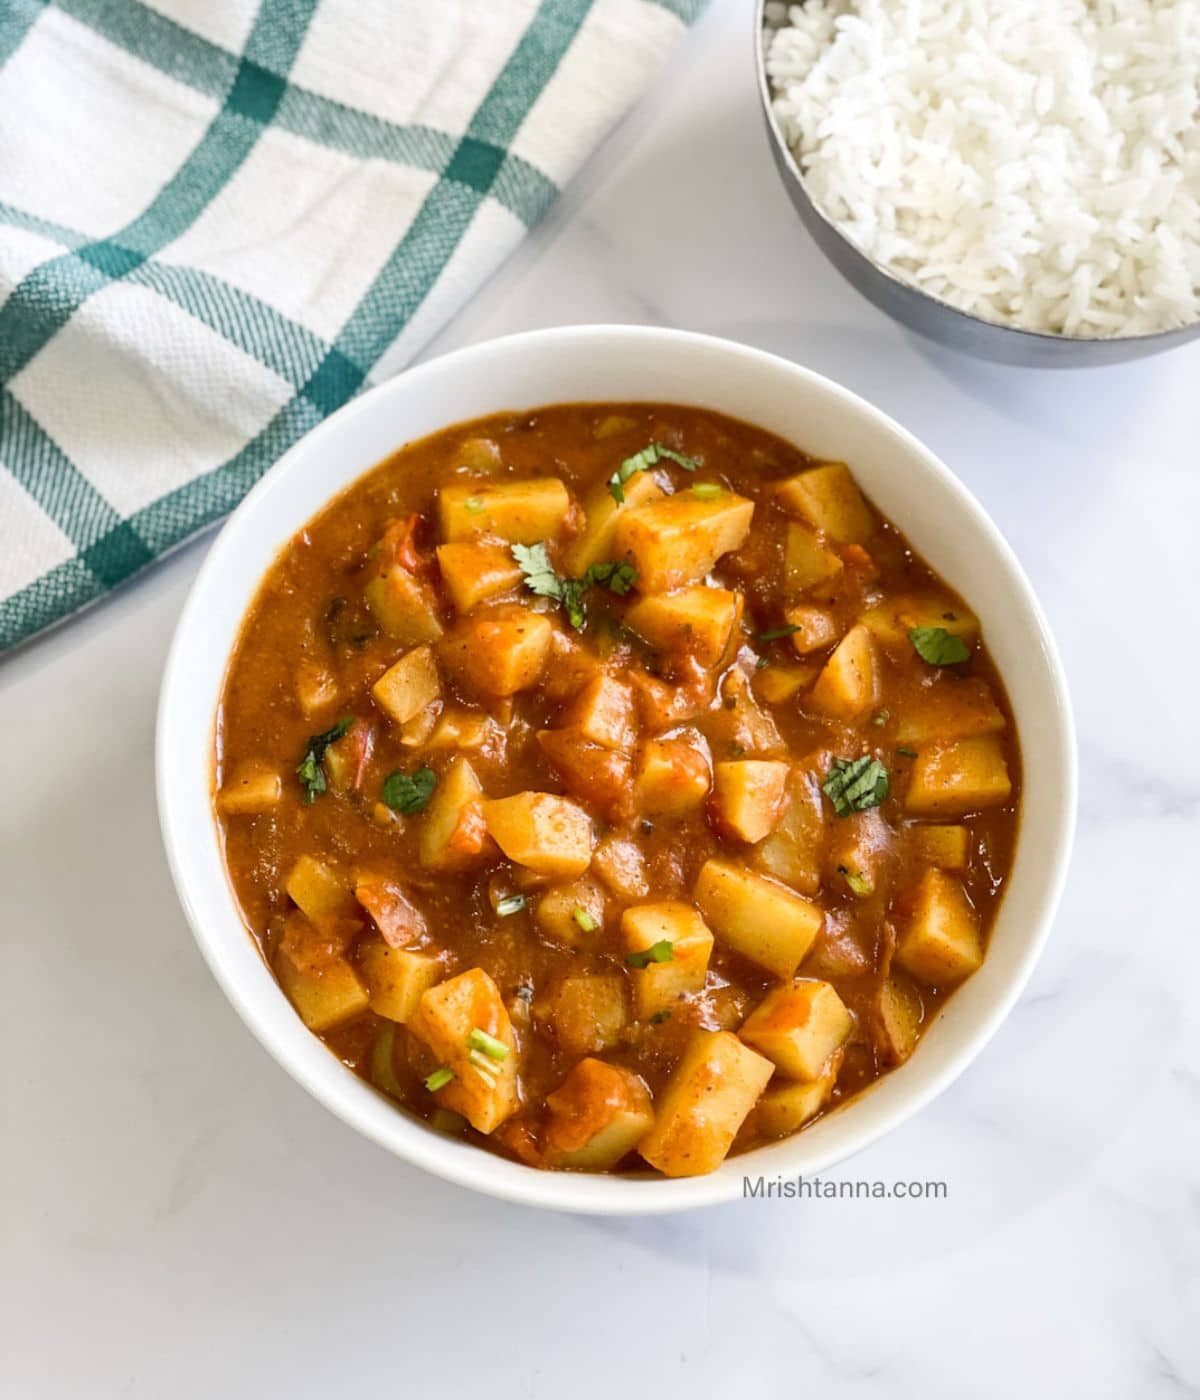 A bowl of aloo tomato curry is on the table with a side of rice.